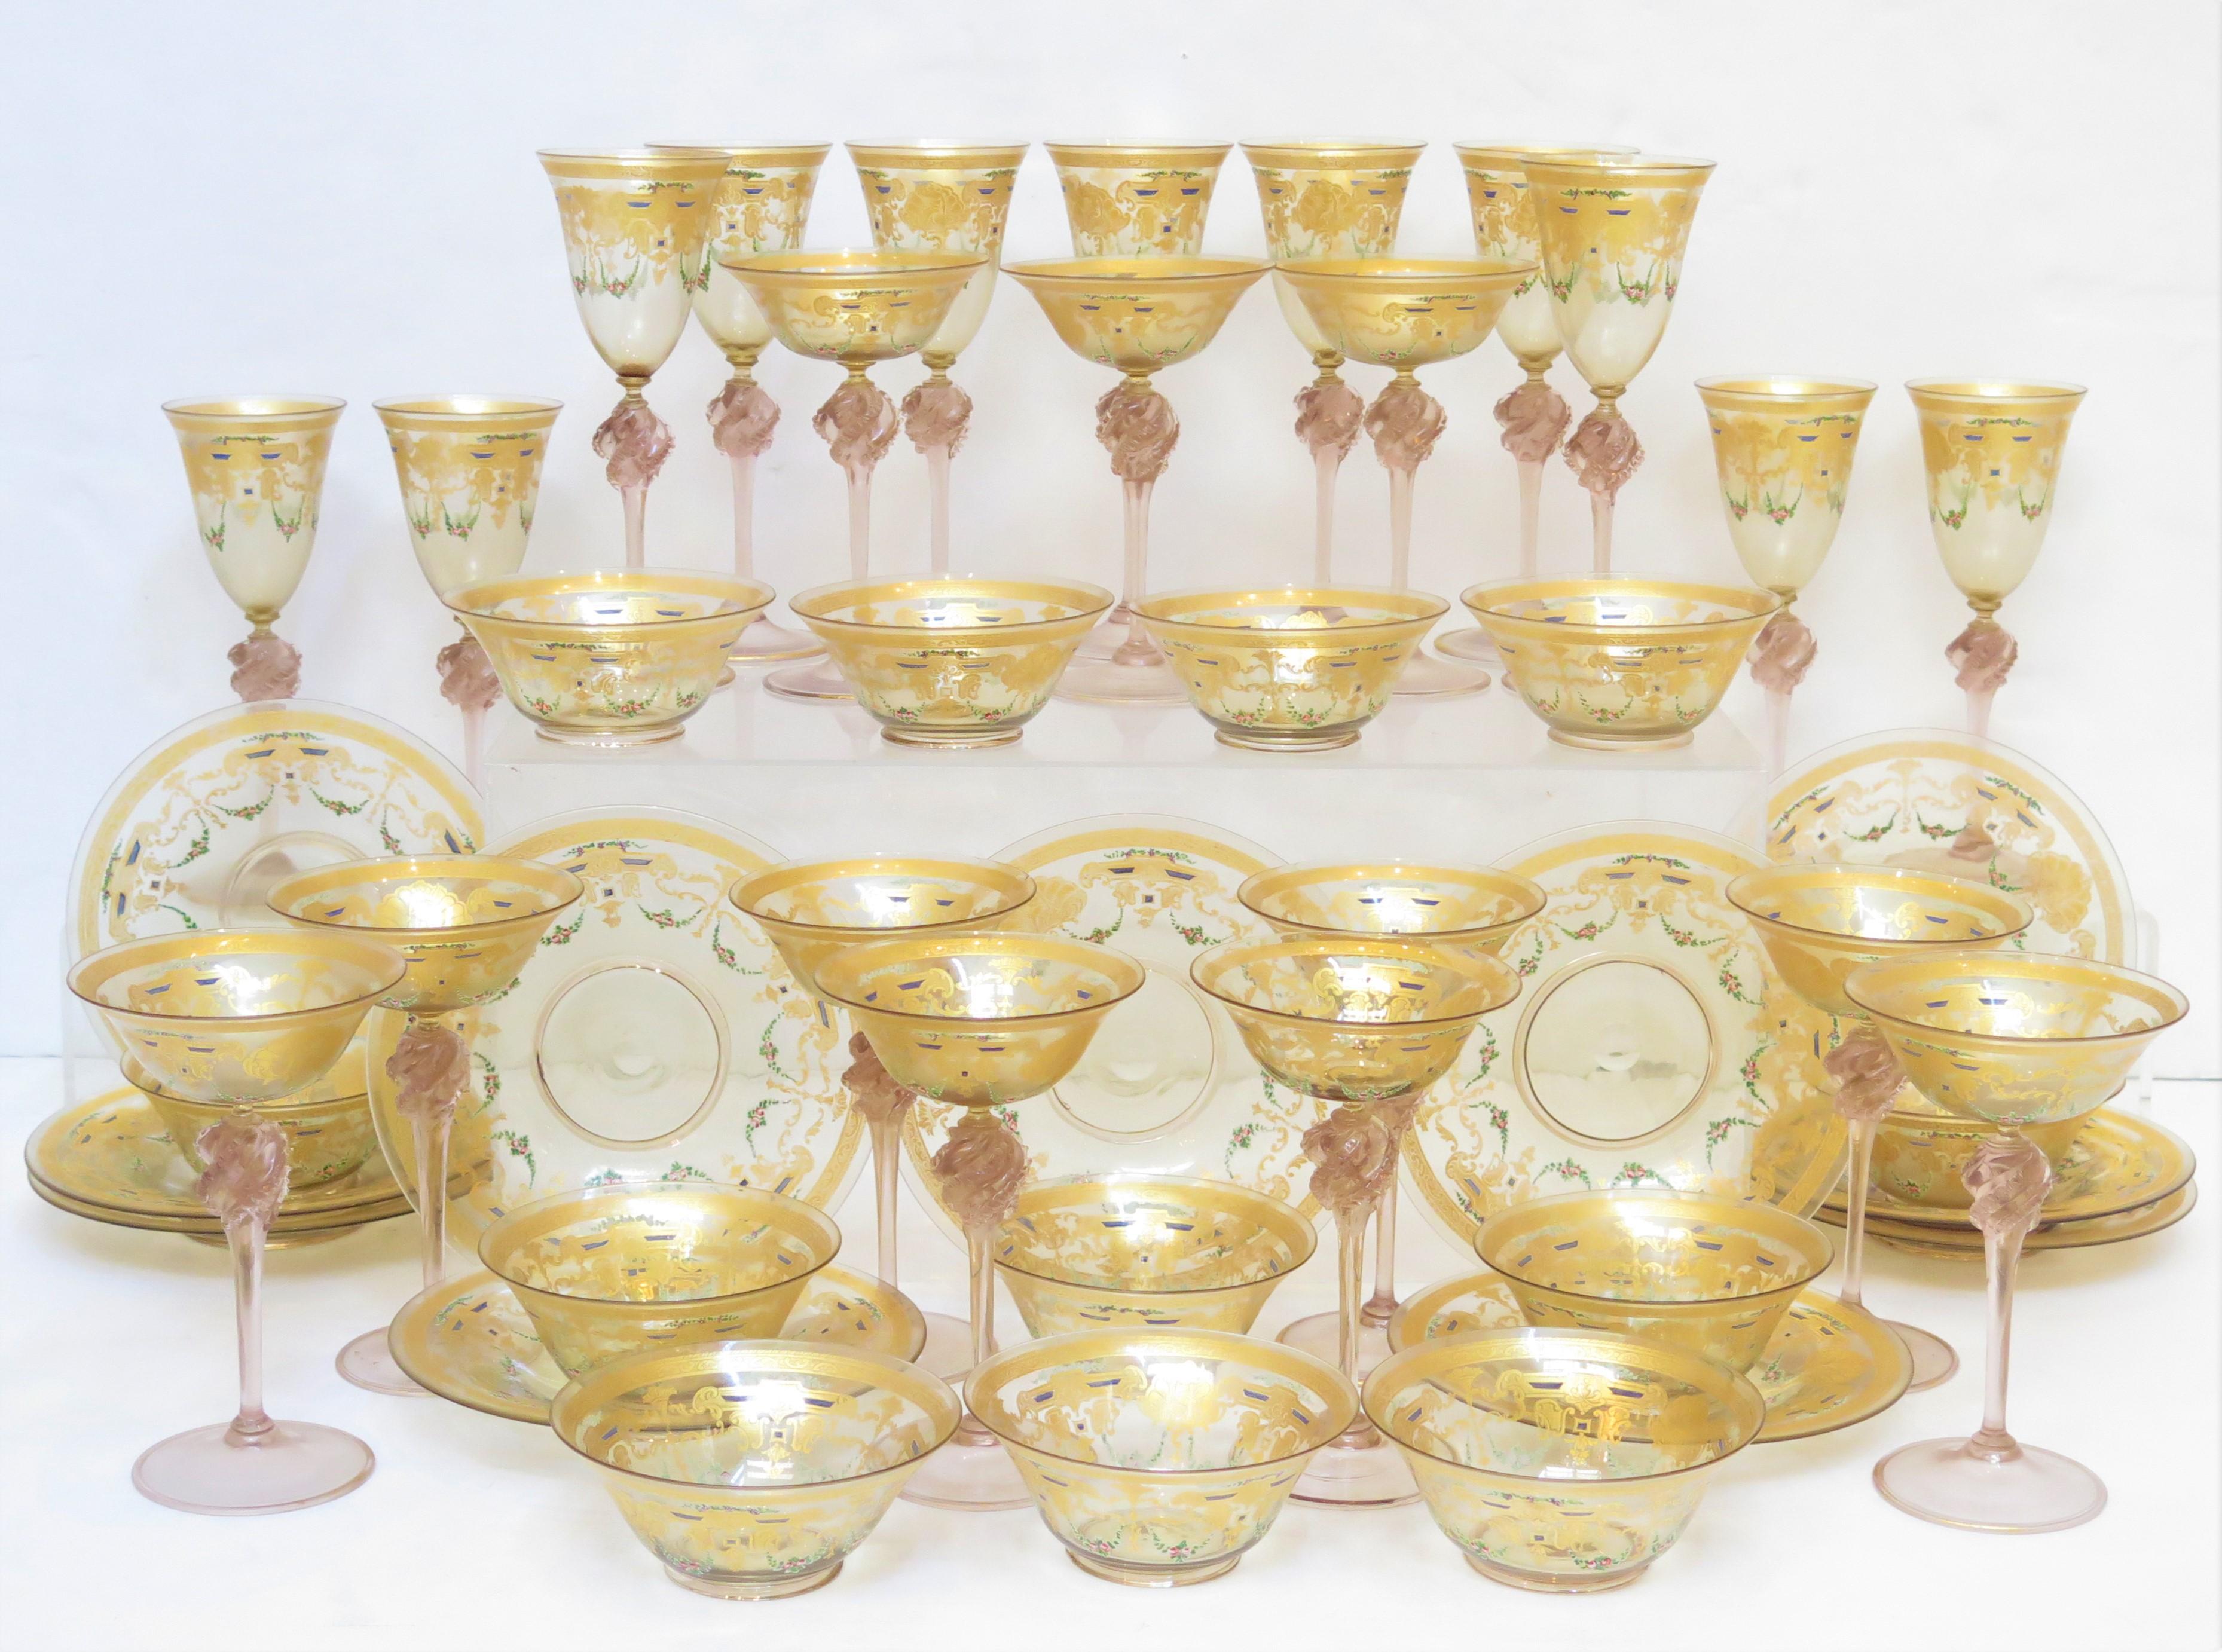 45 piece group / set of Venetian Murano glass stemware, including Champagne coupes, wine glasses, small bowls and plates with hand-painted grape vine and flower garland pattern. Italy. 19th century   

MEASUREMENTS:    

11 small plates 8''